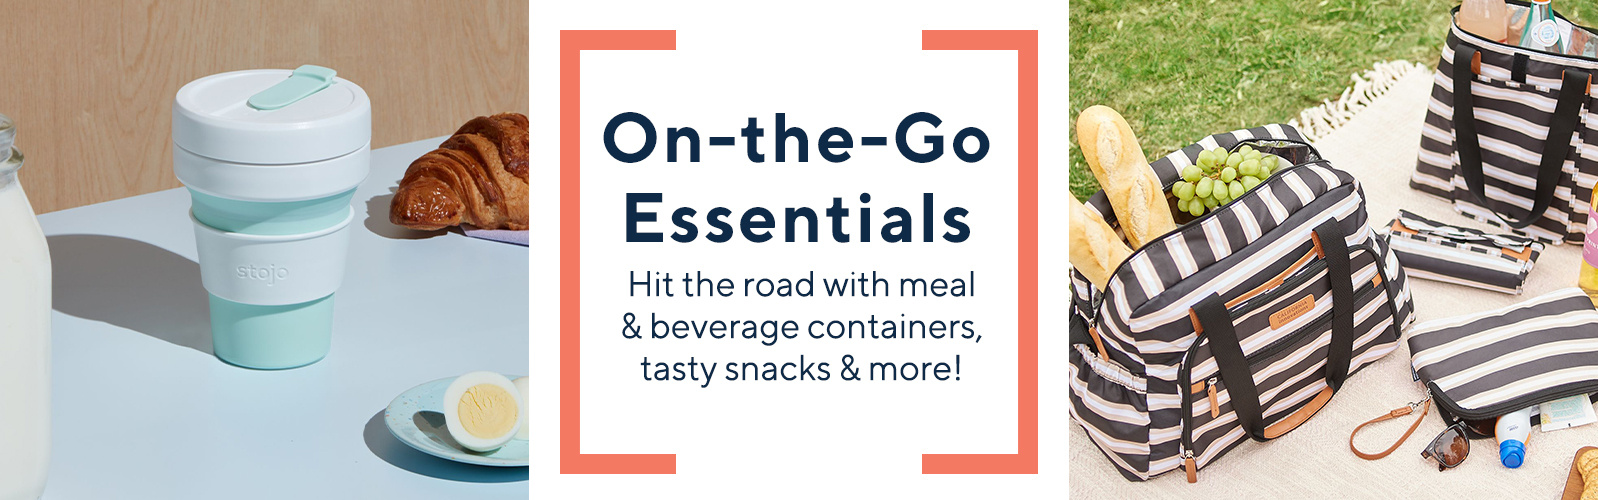 On-the-Go Essentials  Hit the road with meal & beverage containers, tasty snacks & more! 